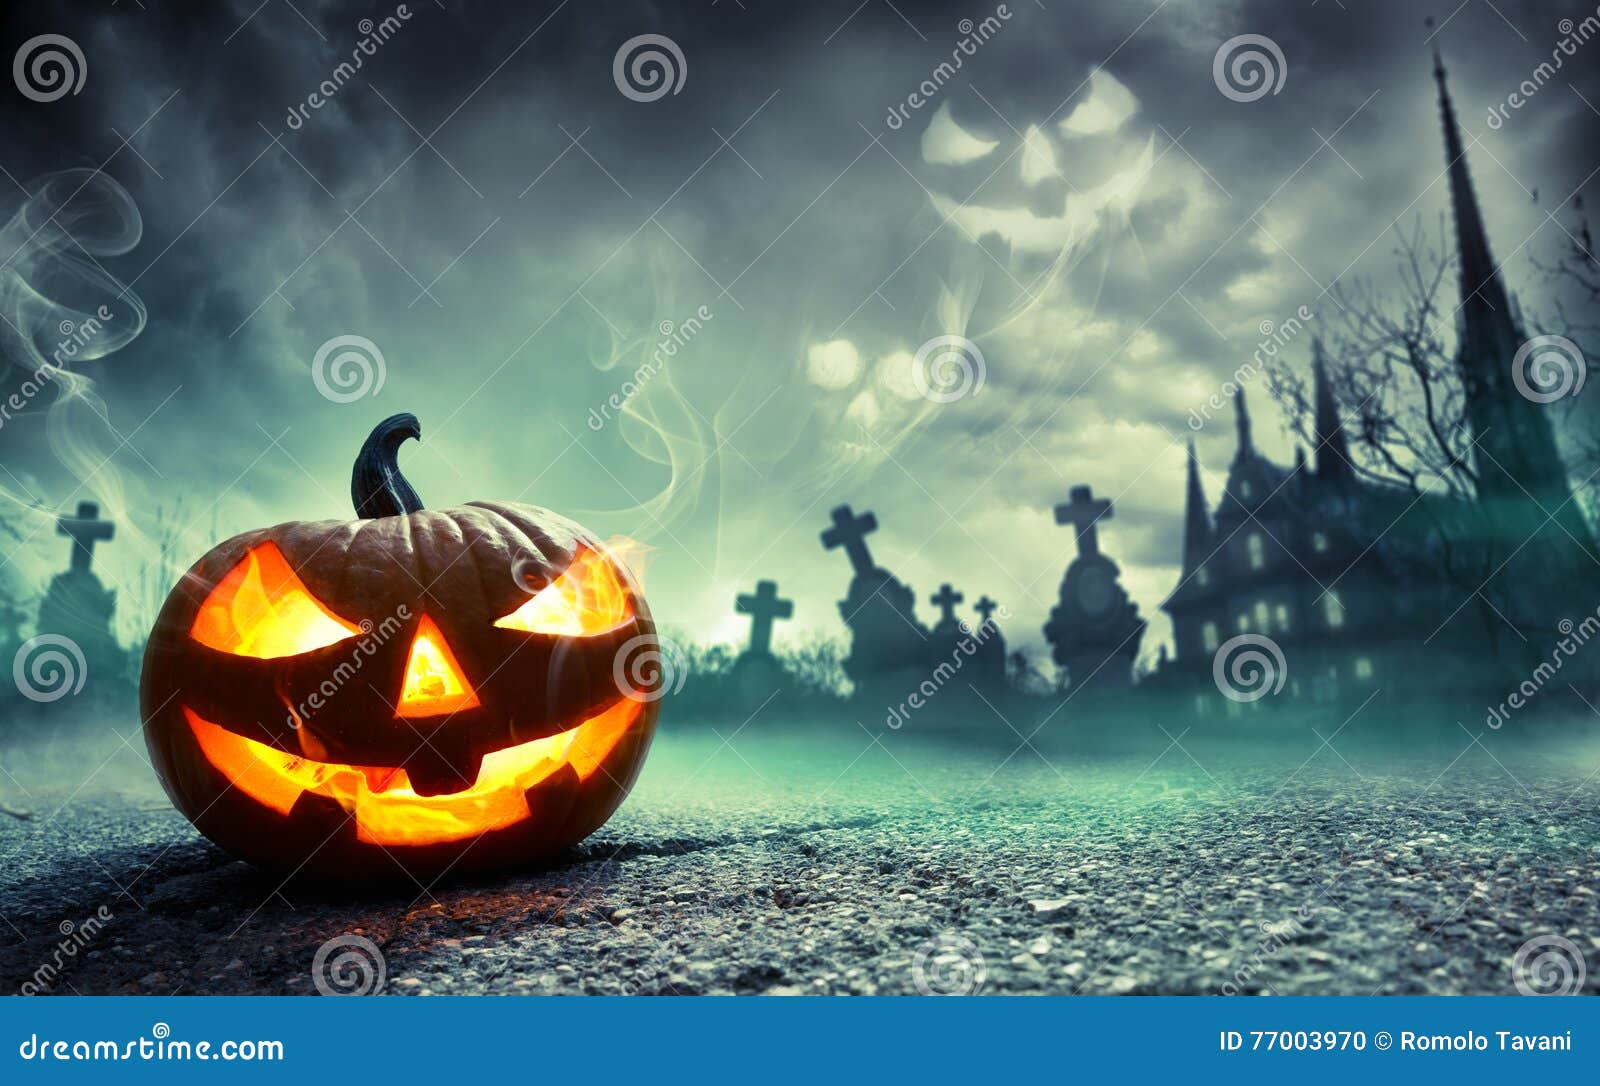 pumpkin burning in a graveyard with ghost